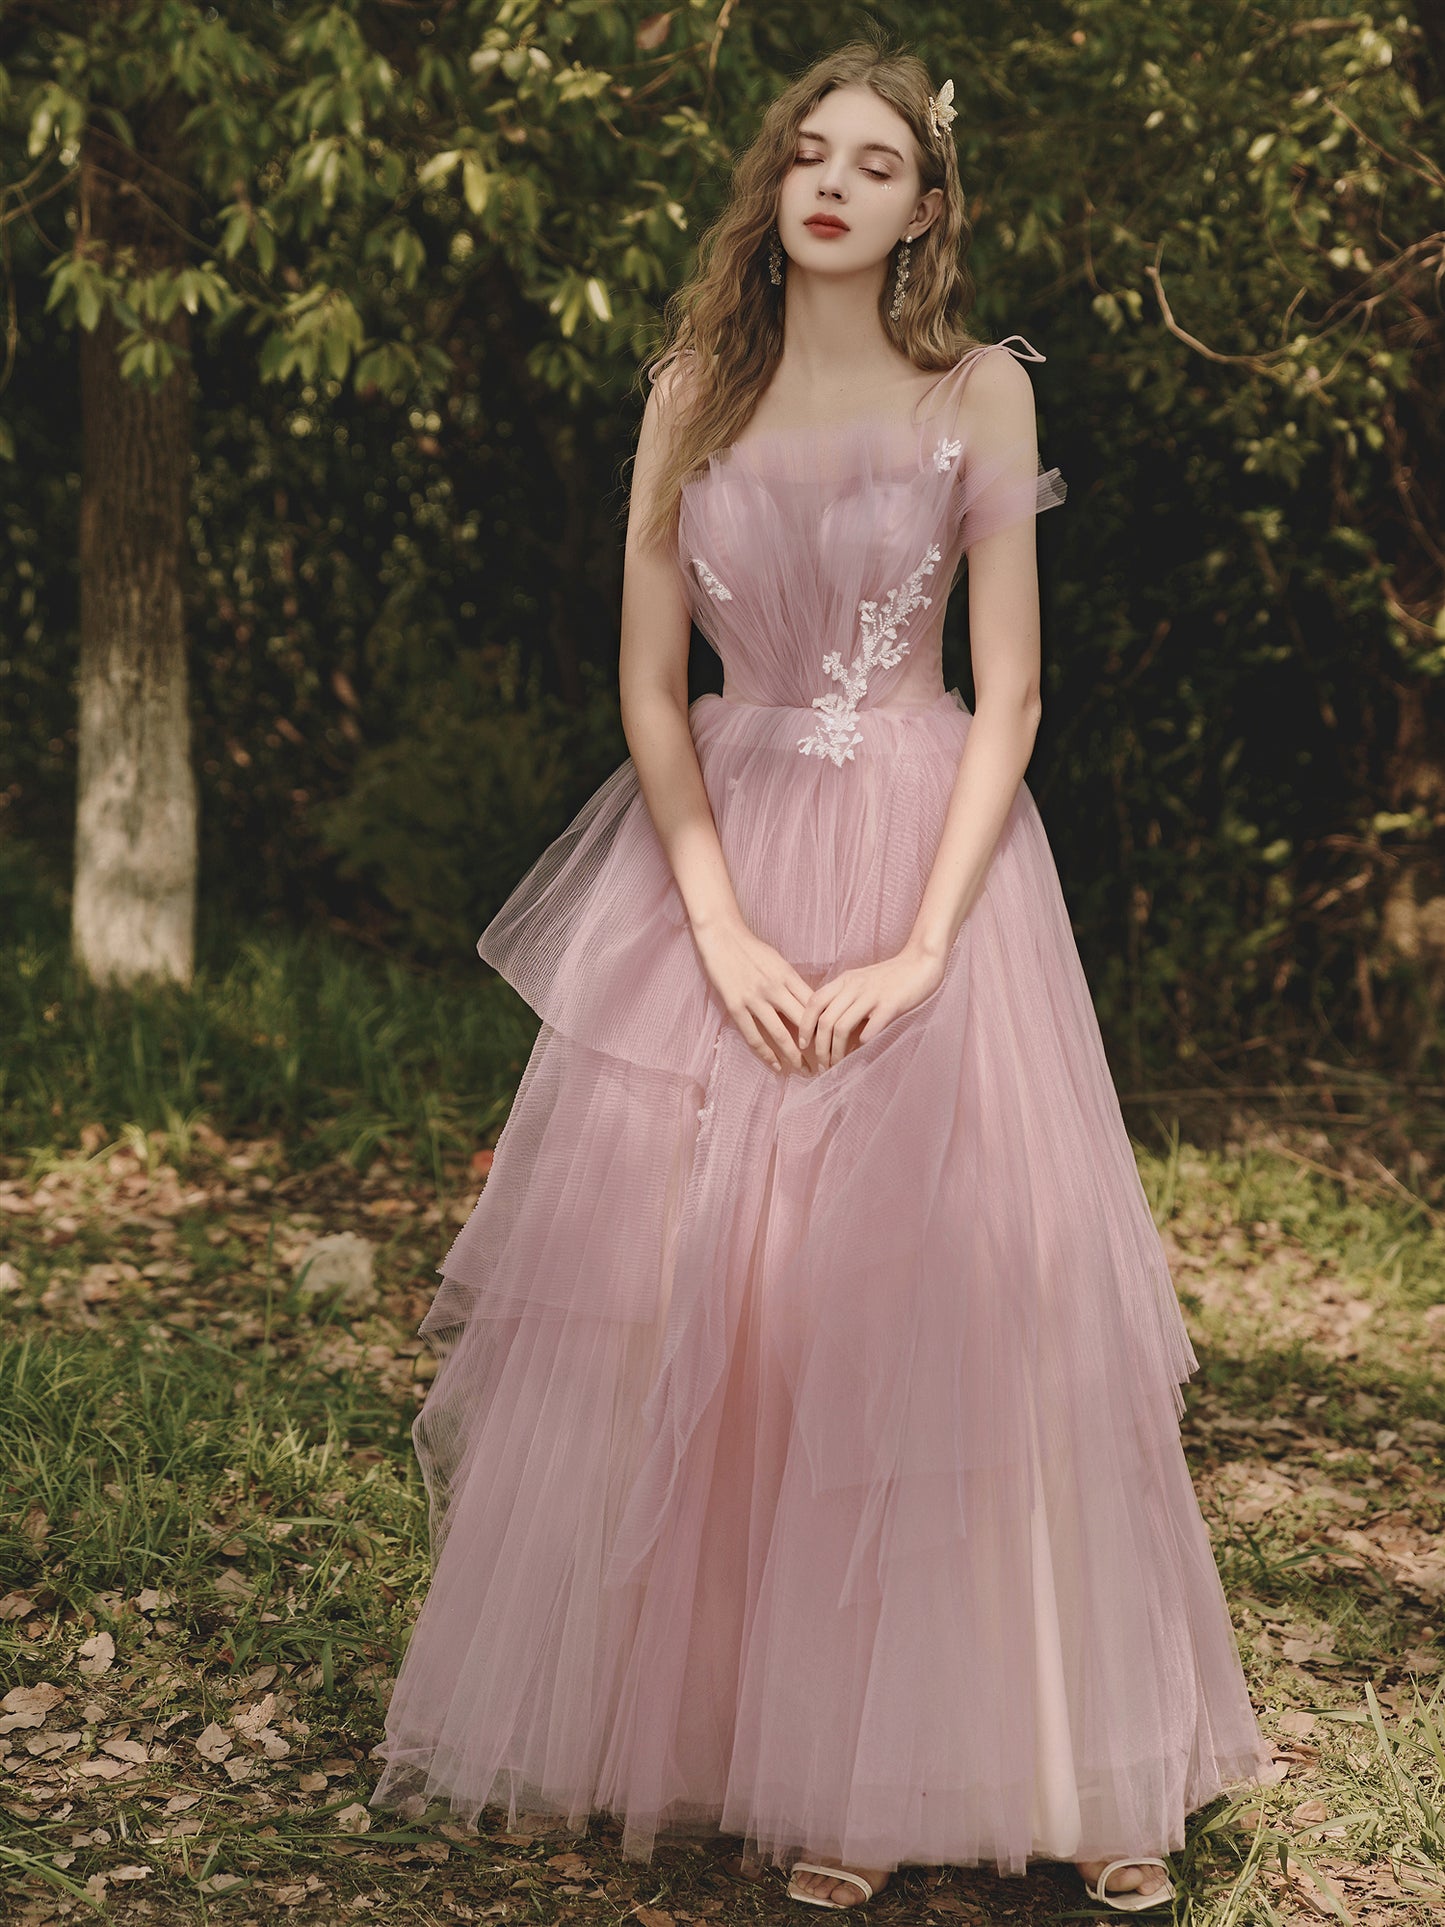 Dusty Rose Flowy Tulle Tiered Prom Dress - DollyGown